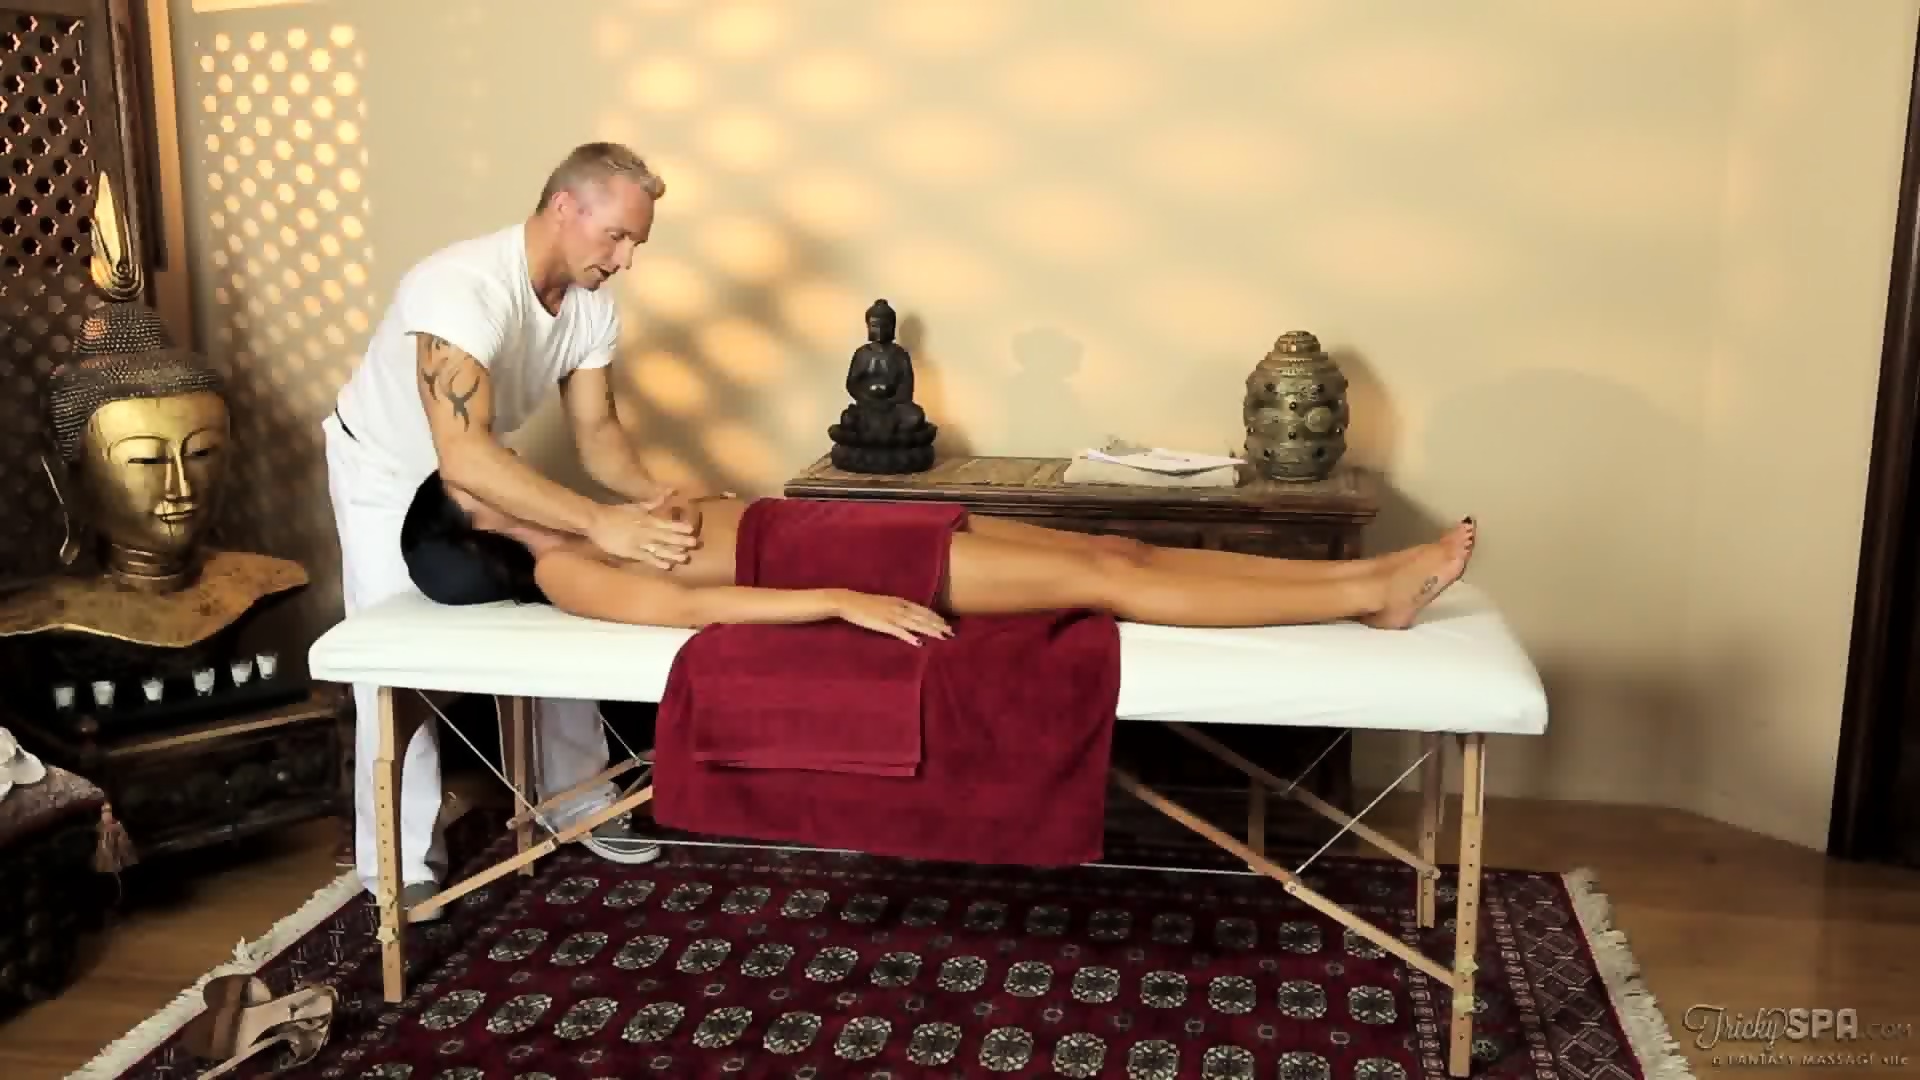 Sensual Action On Massage Table Eporner Free Hd Porn Tube